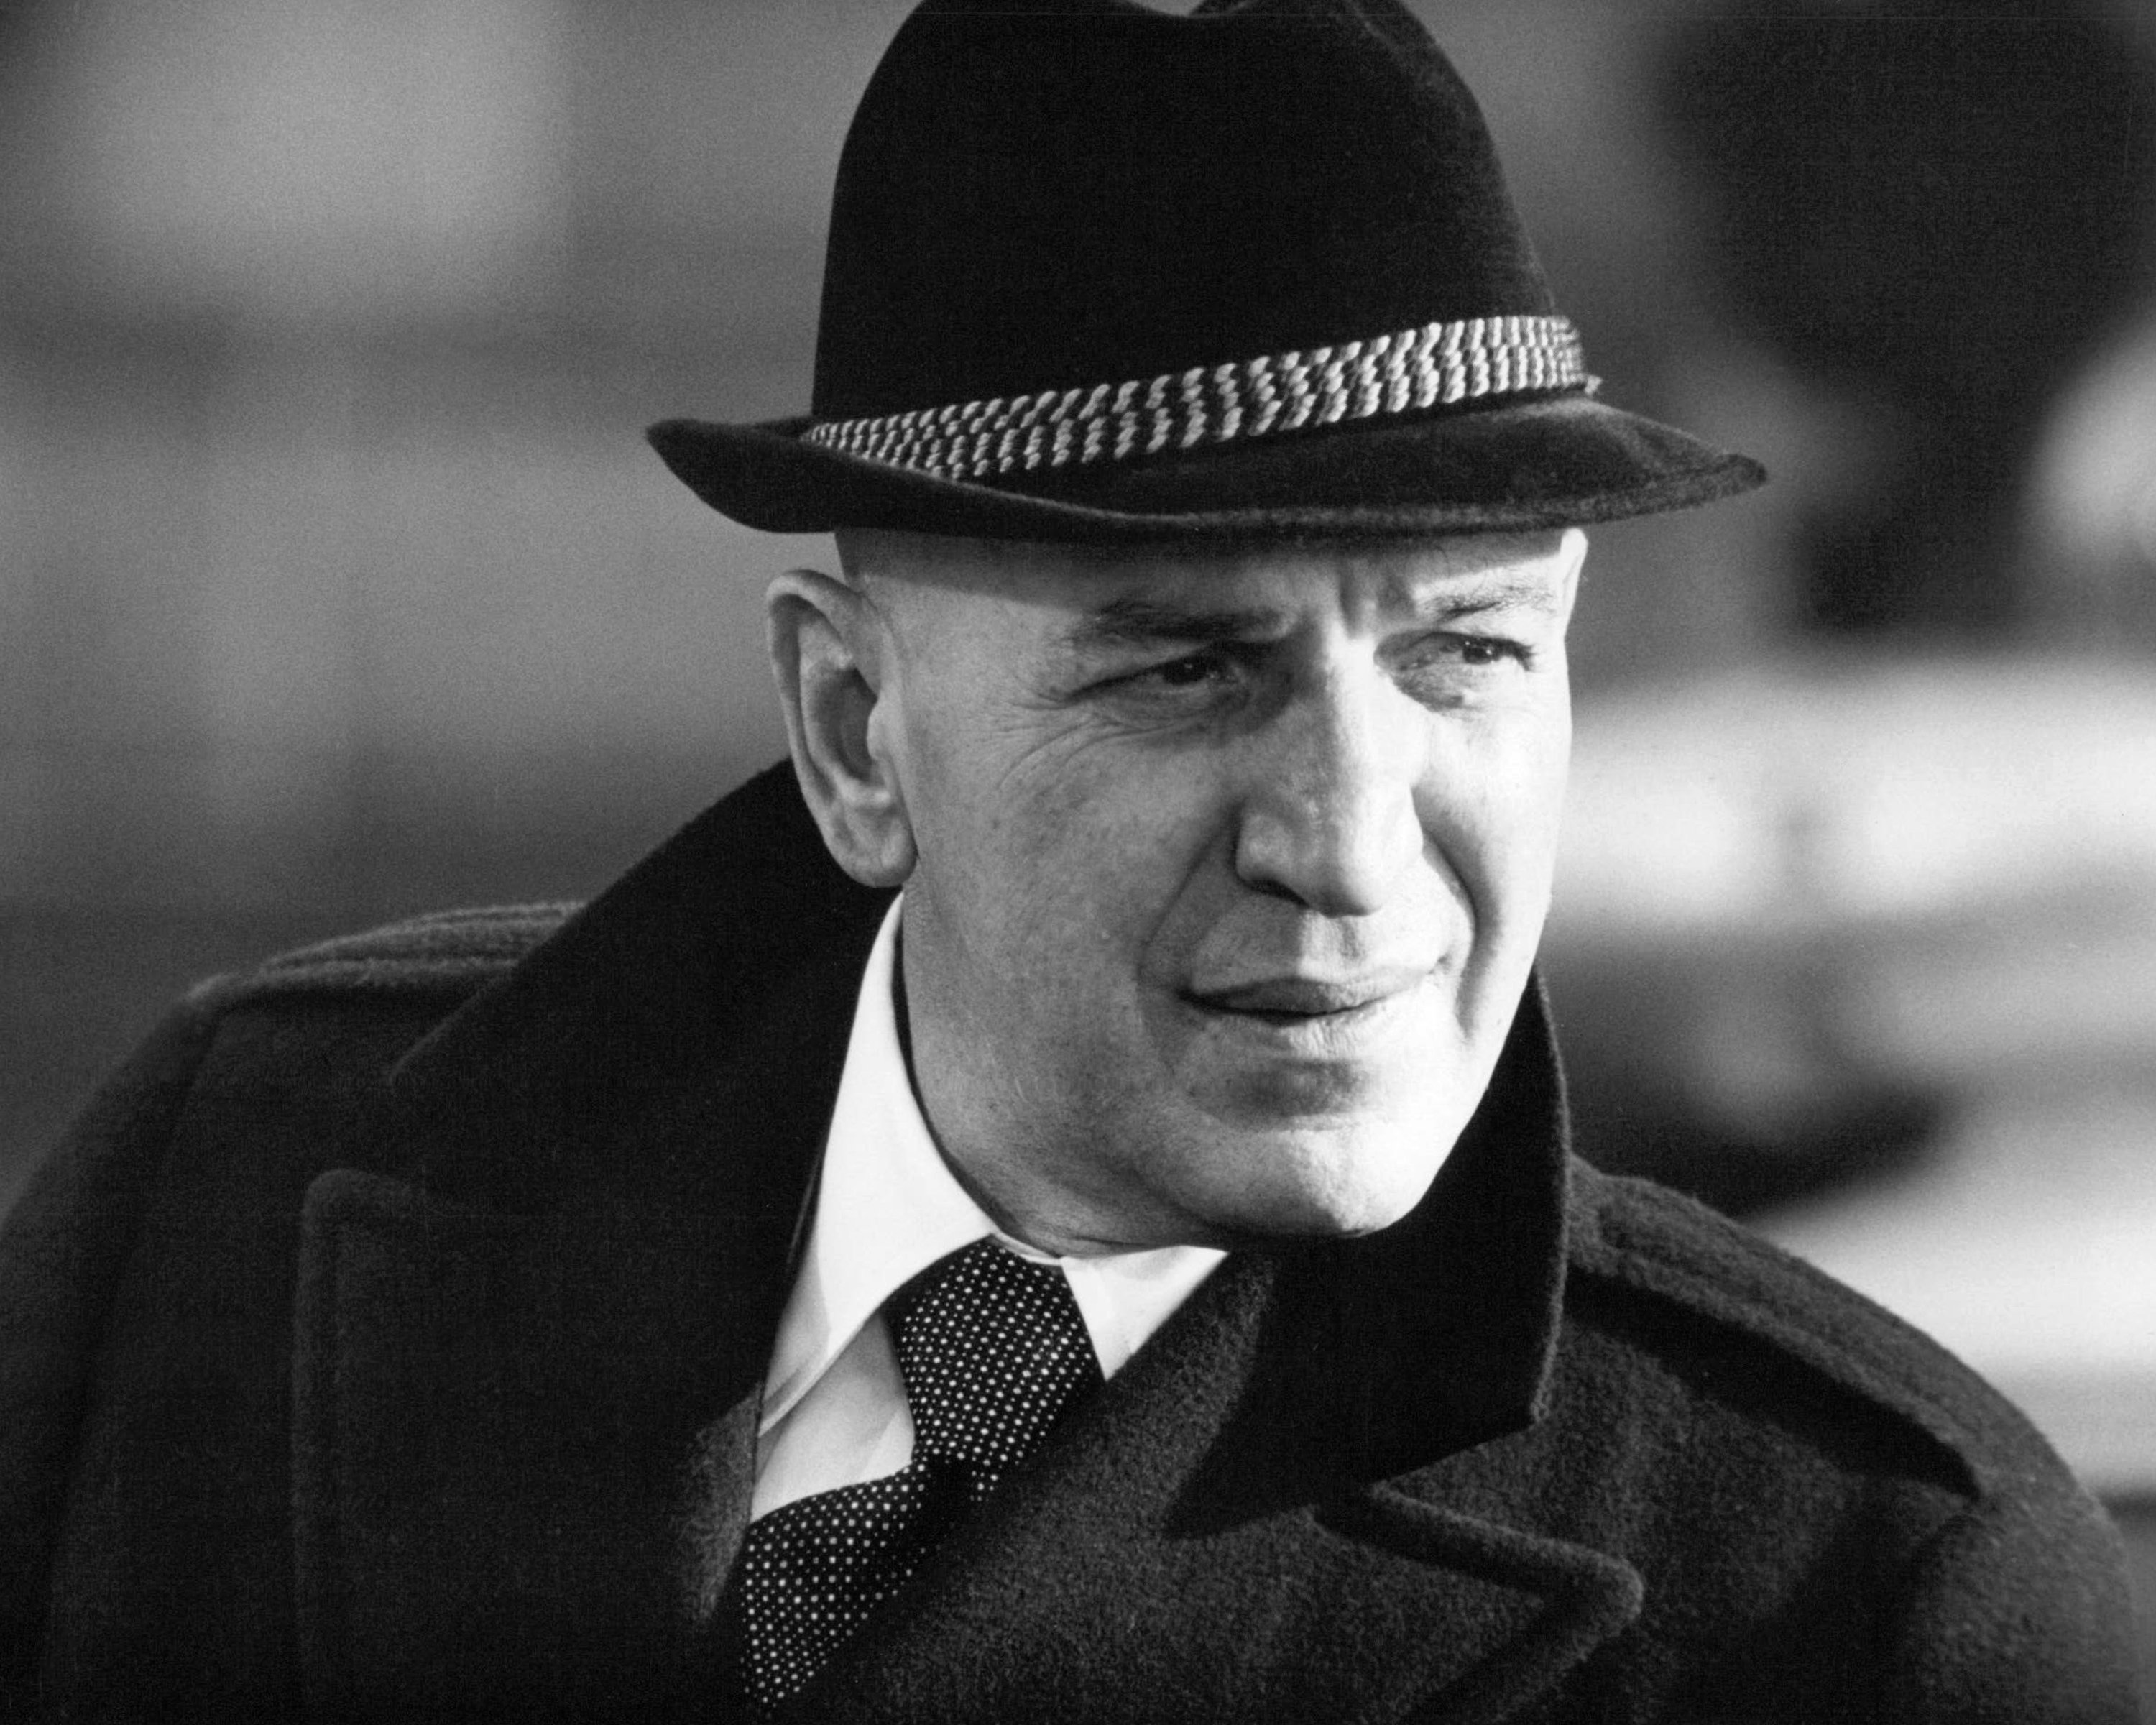 American actor Telly Savalas as Detective Lieutenant Theo Kojak in the TV crime series 'Kojak', in 1975. | Source: Getty Images